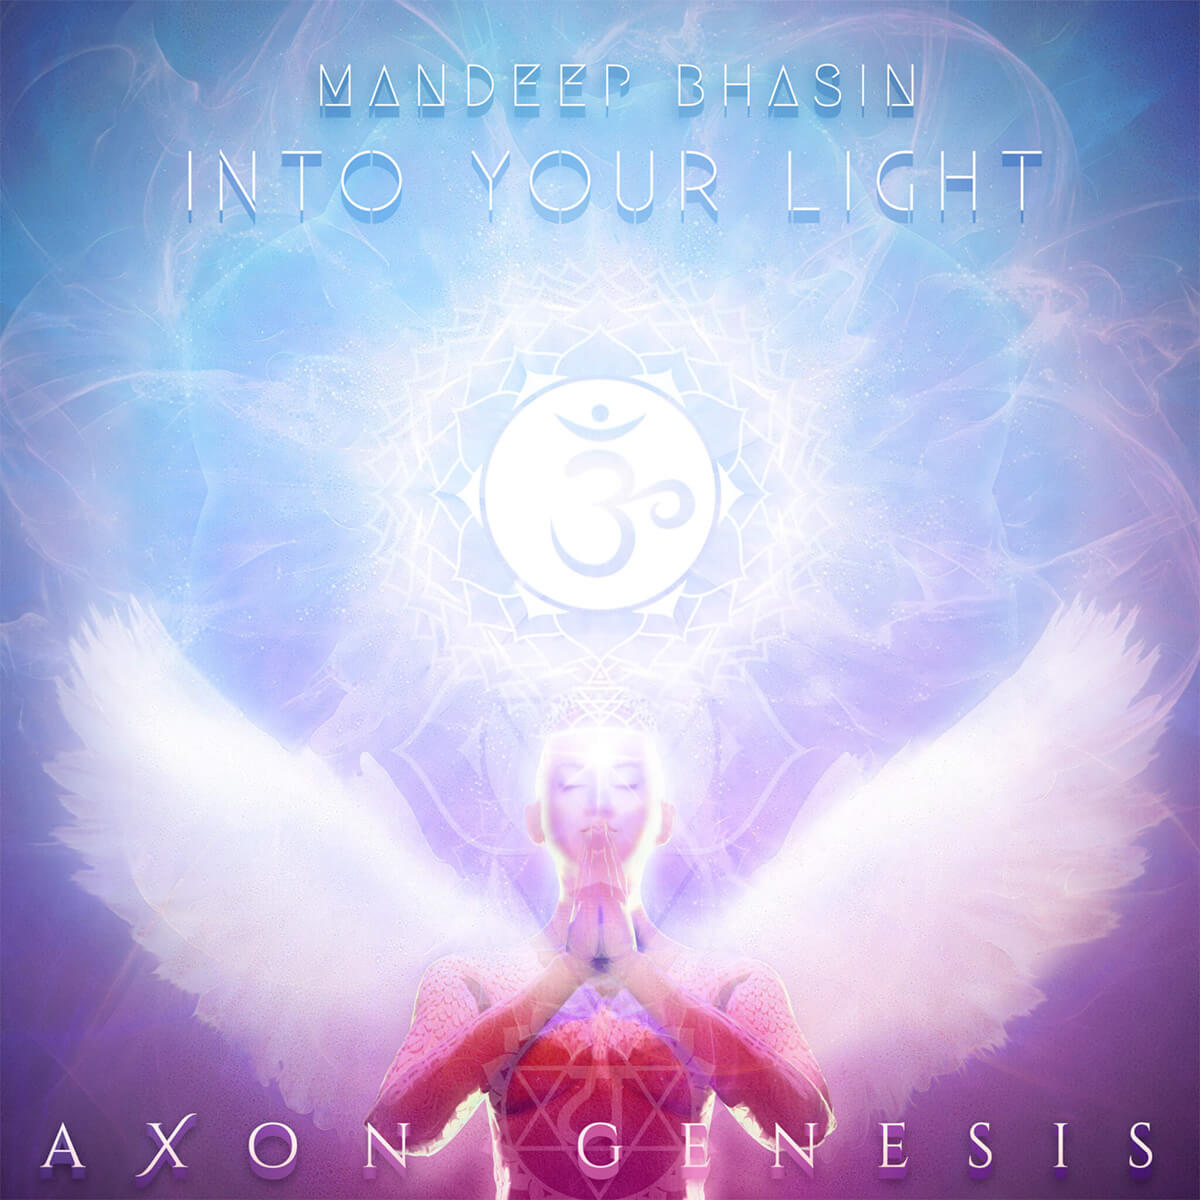 Into Your Light Music and Cover Art by Axon Genesis